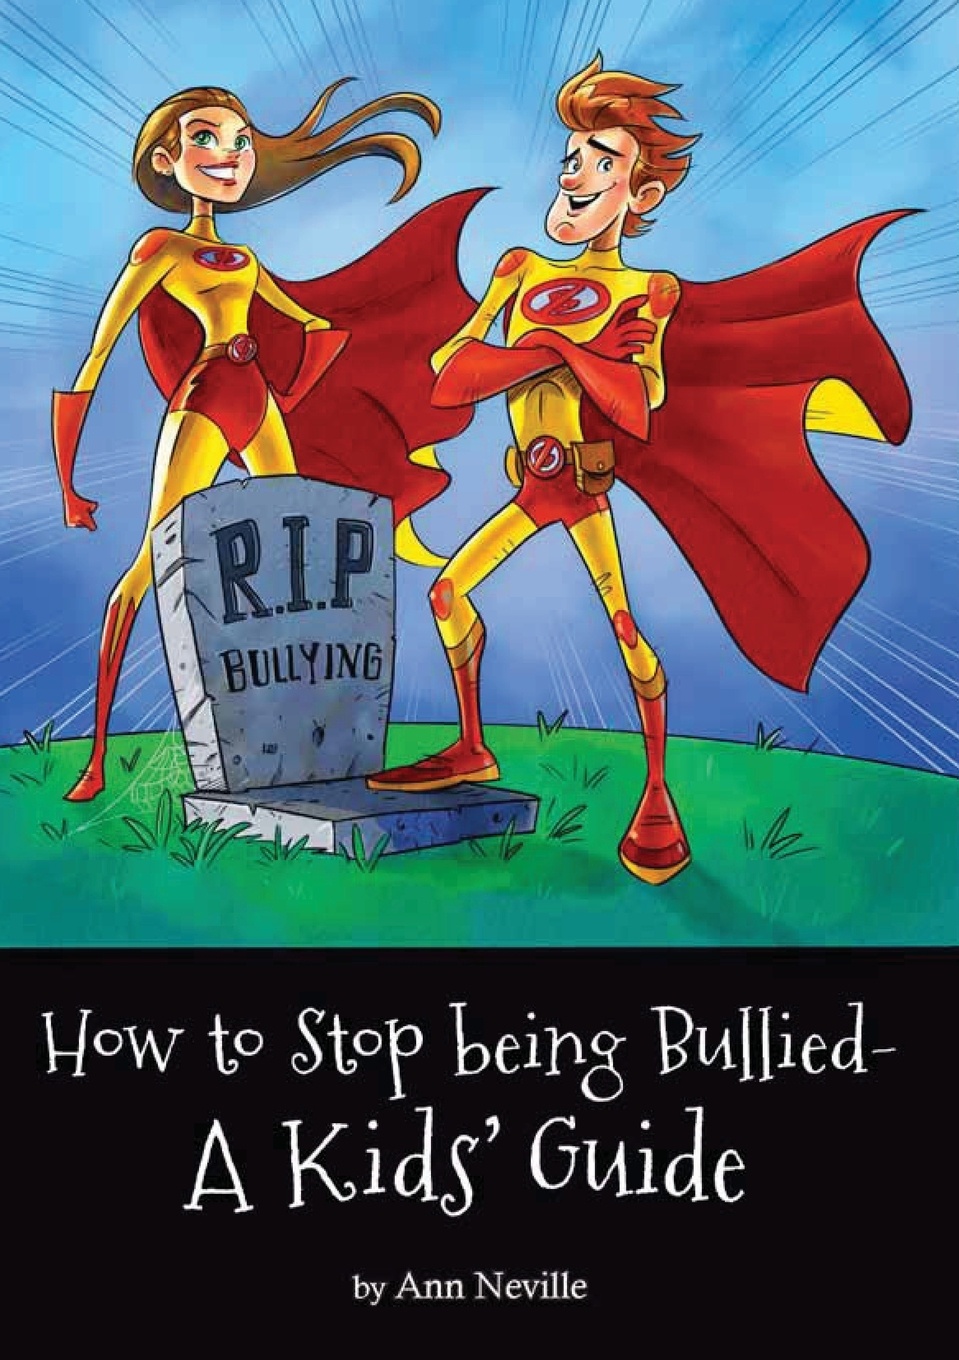 How to Stop being Bullied - A Kids` Guide